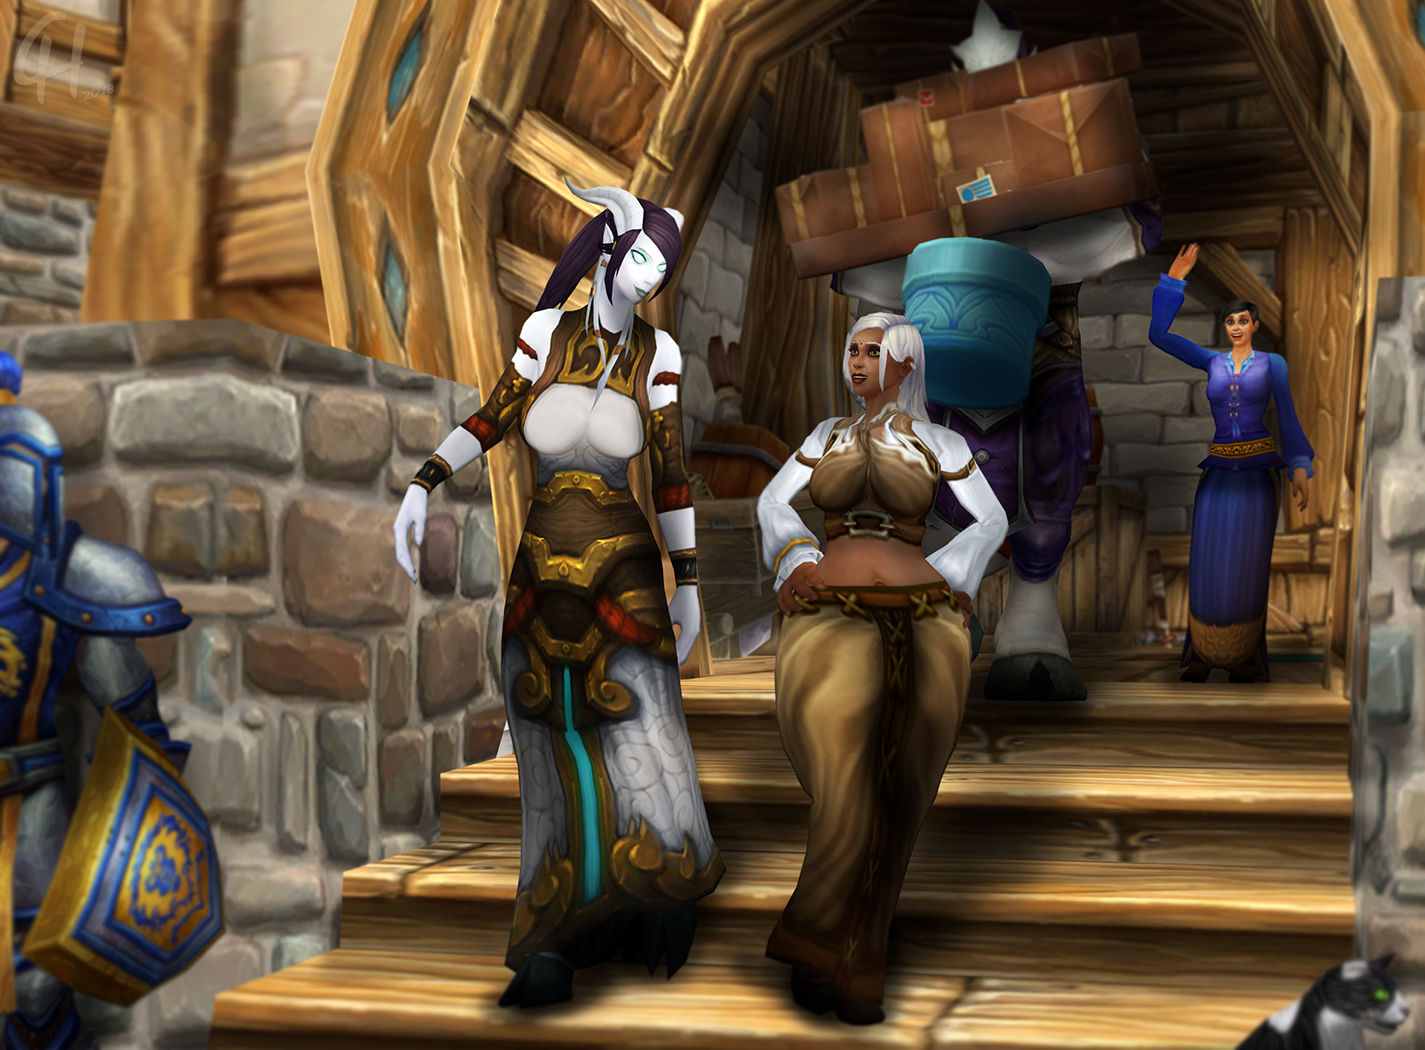 Shopping With the Girls [SFW/Human/Draenei]
While on a duty leave from her usual
post in Hearthglen, Urdina spent her
day shopping with her new friend.
Luckily her friends' brother was with
them to carry all the parcels.
[b][url=http://bakaras.com/murlocish/albums/userpics/10001/ShoppingdayUrd+DraesXL.jpg]==XL-Size Edit==?[/url][/b]
Keywords: Human;OC;Draenei;SFW